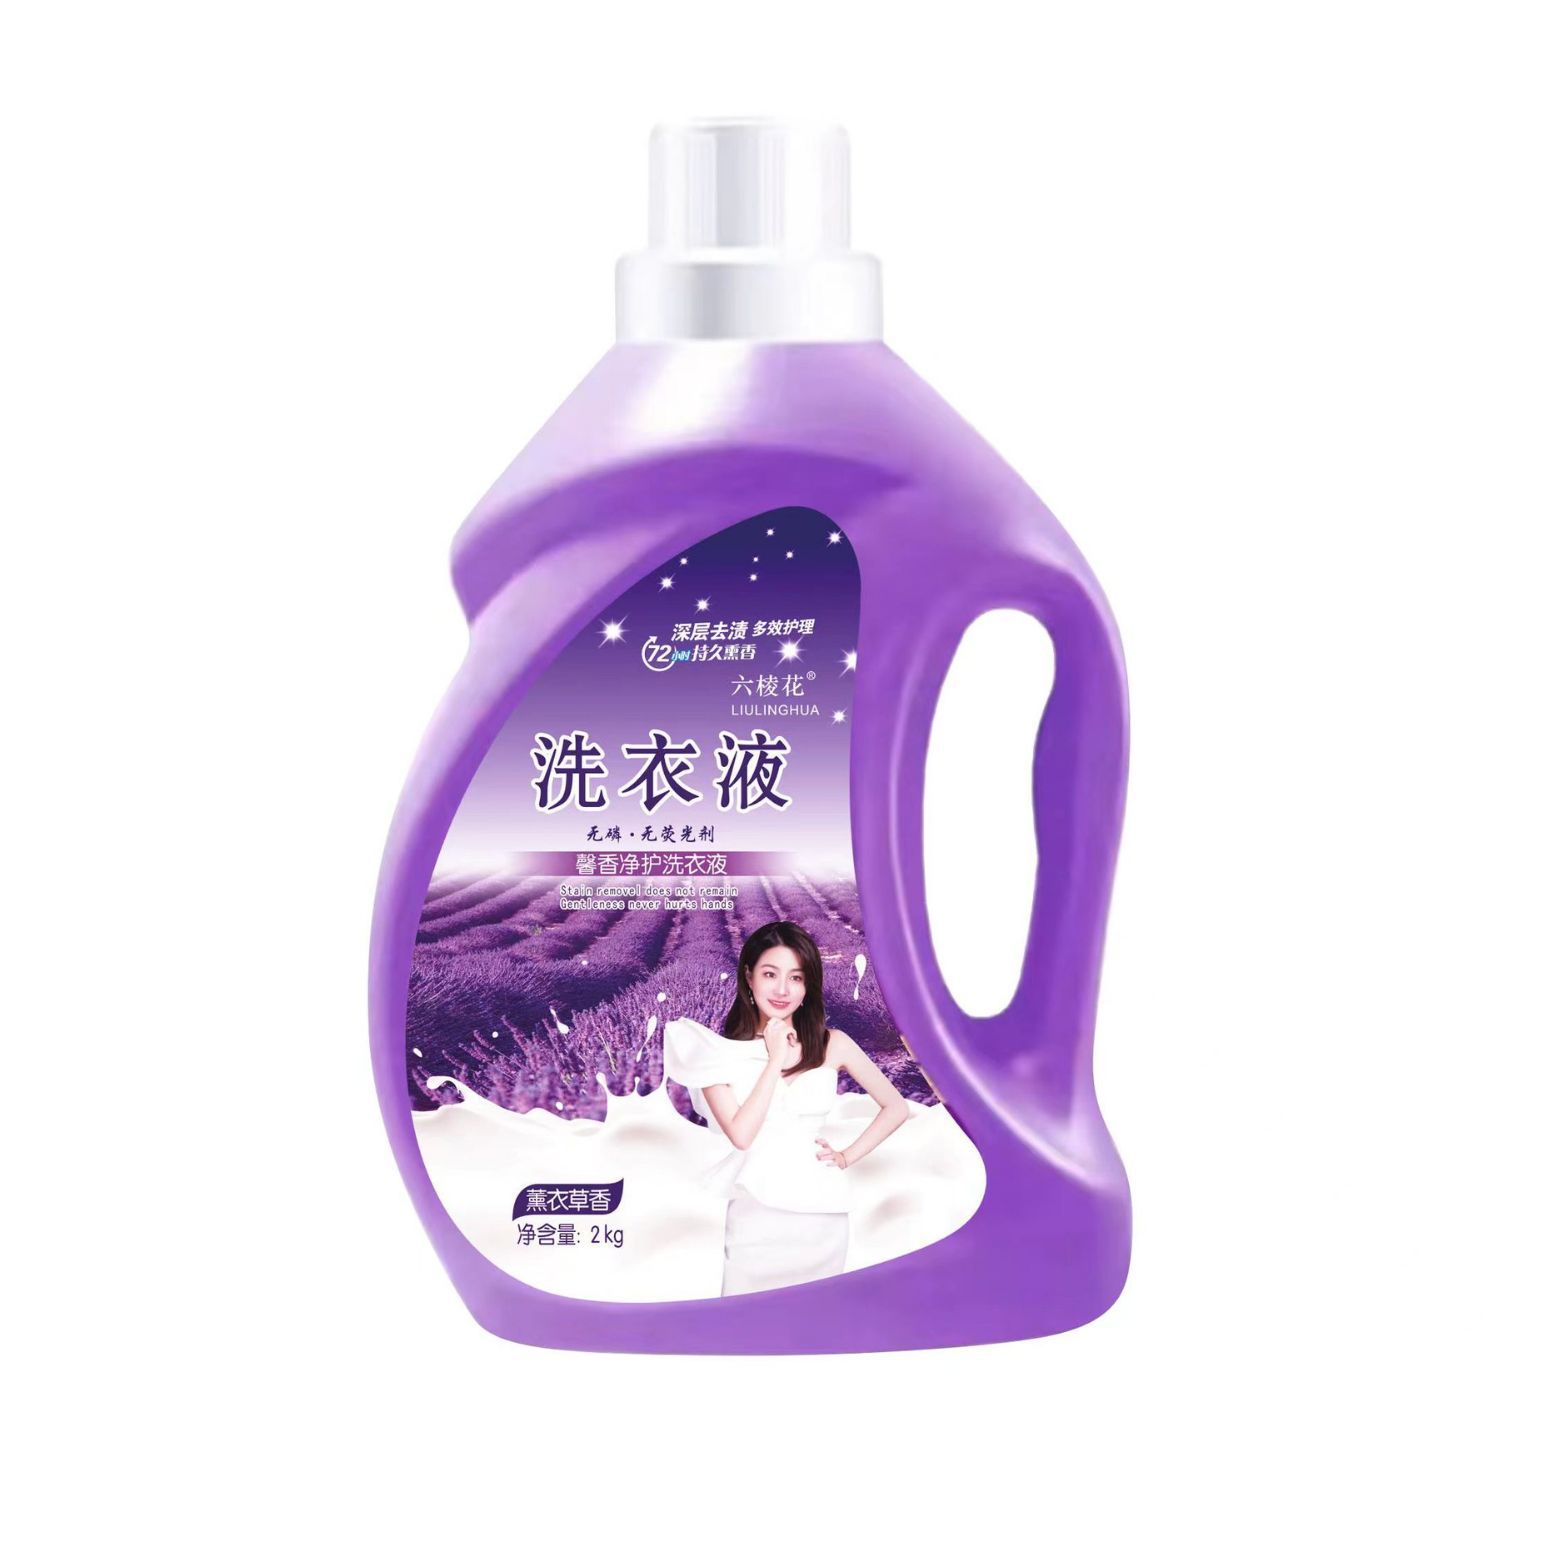 Soda Laundry Detergent Wholesale 2kg Personal Care Product Welfare Activity Gift Lavender Laundry Detergent Wholesale Factory